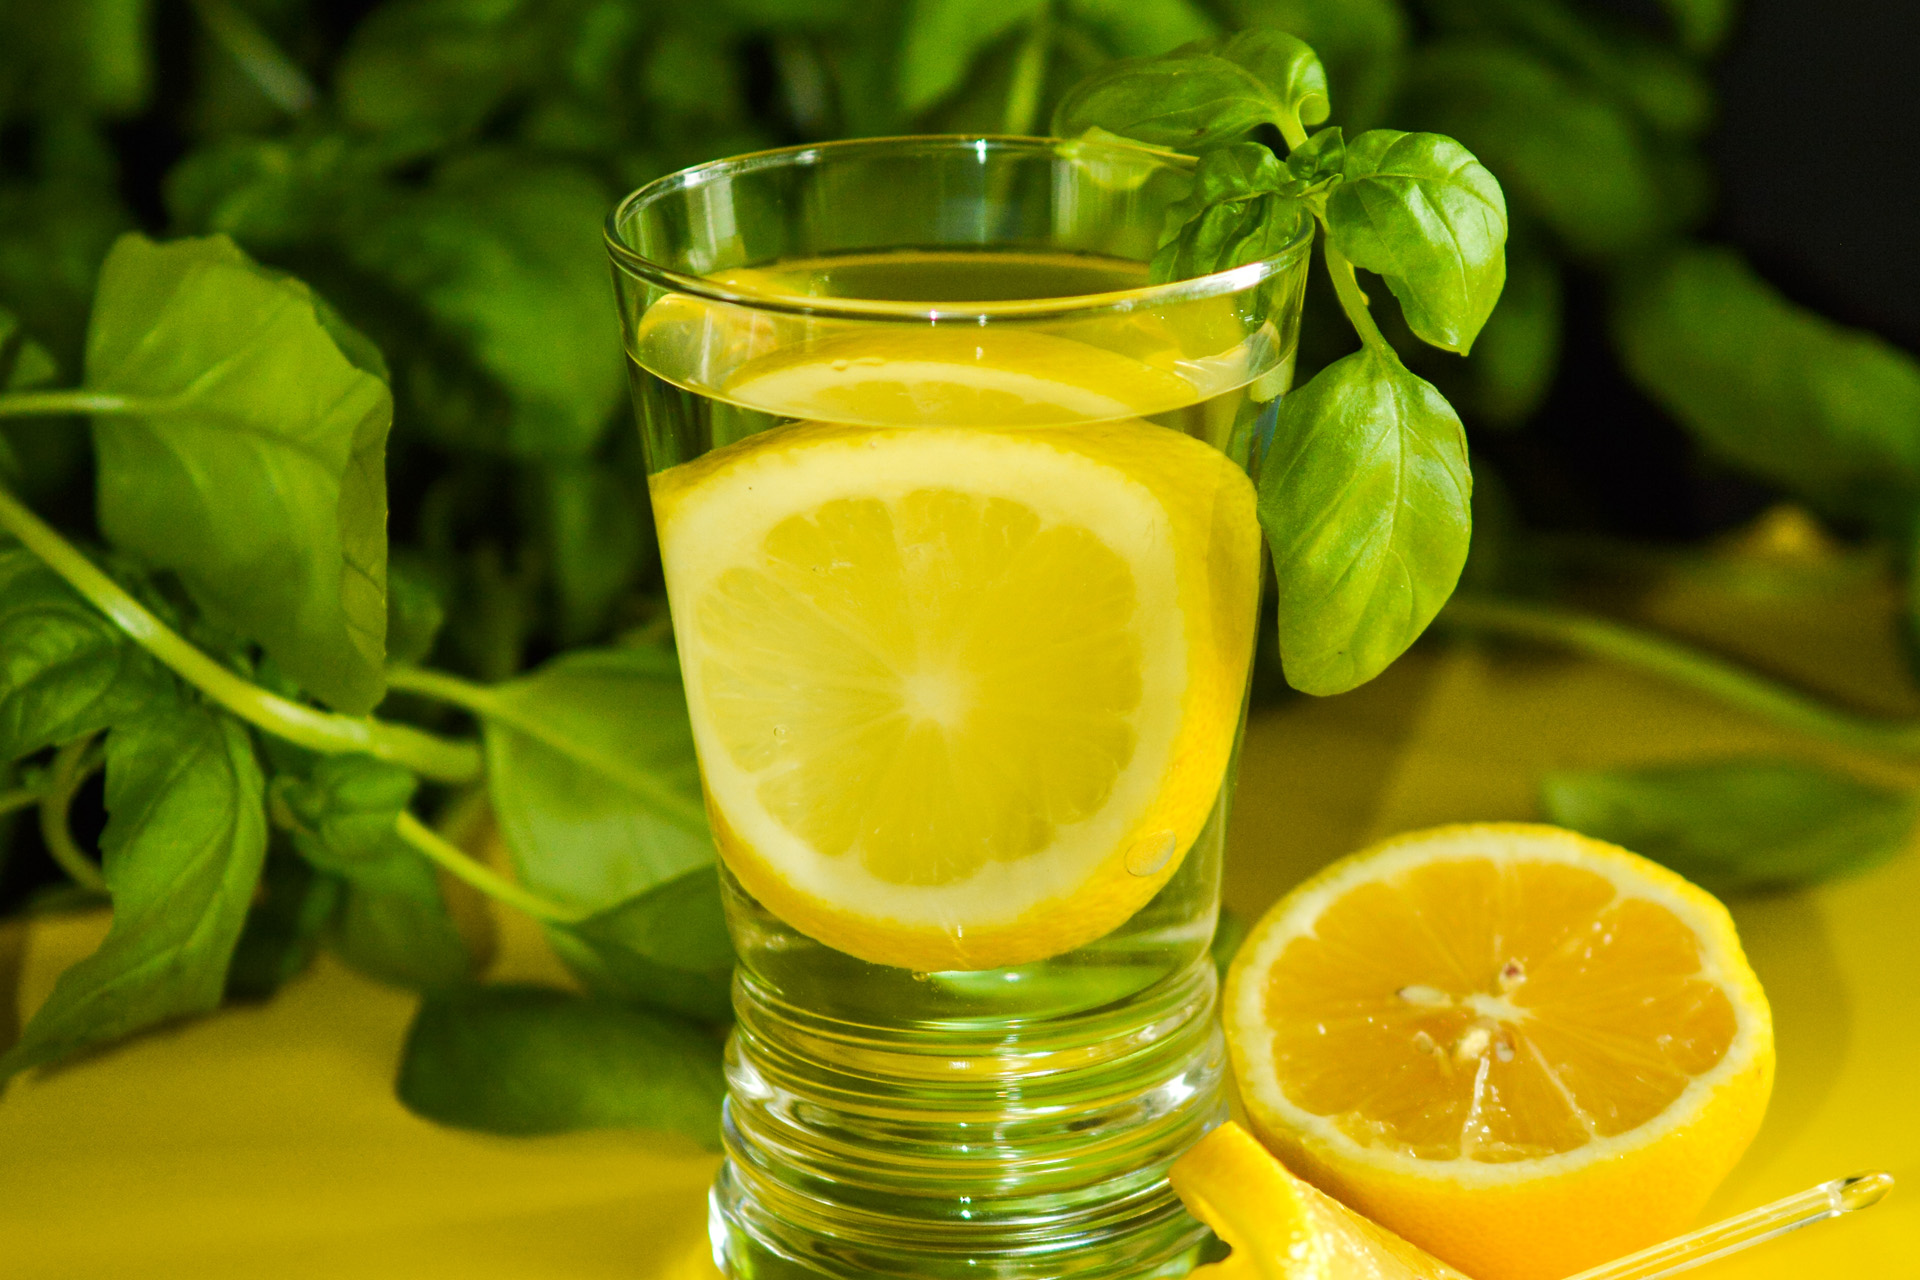 Lemon Water 101: All You Need to Know About the Daily Health Ritual